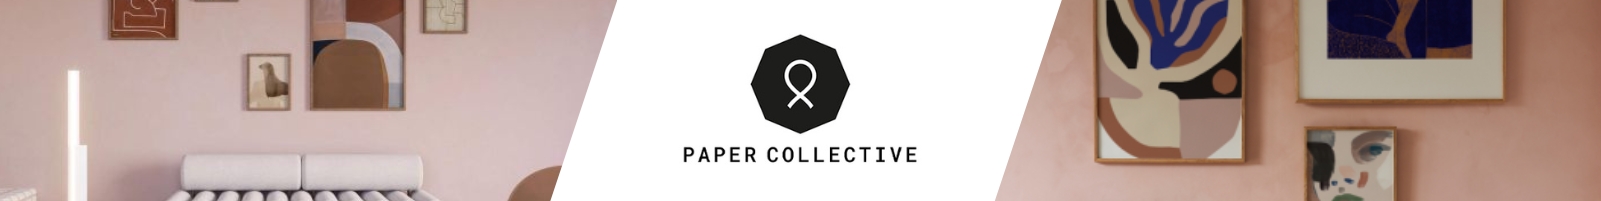 Paper Collective 